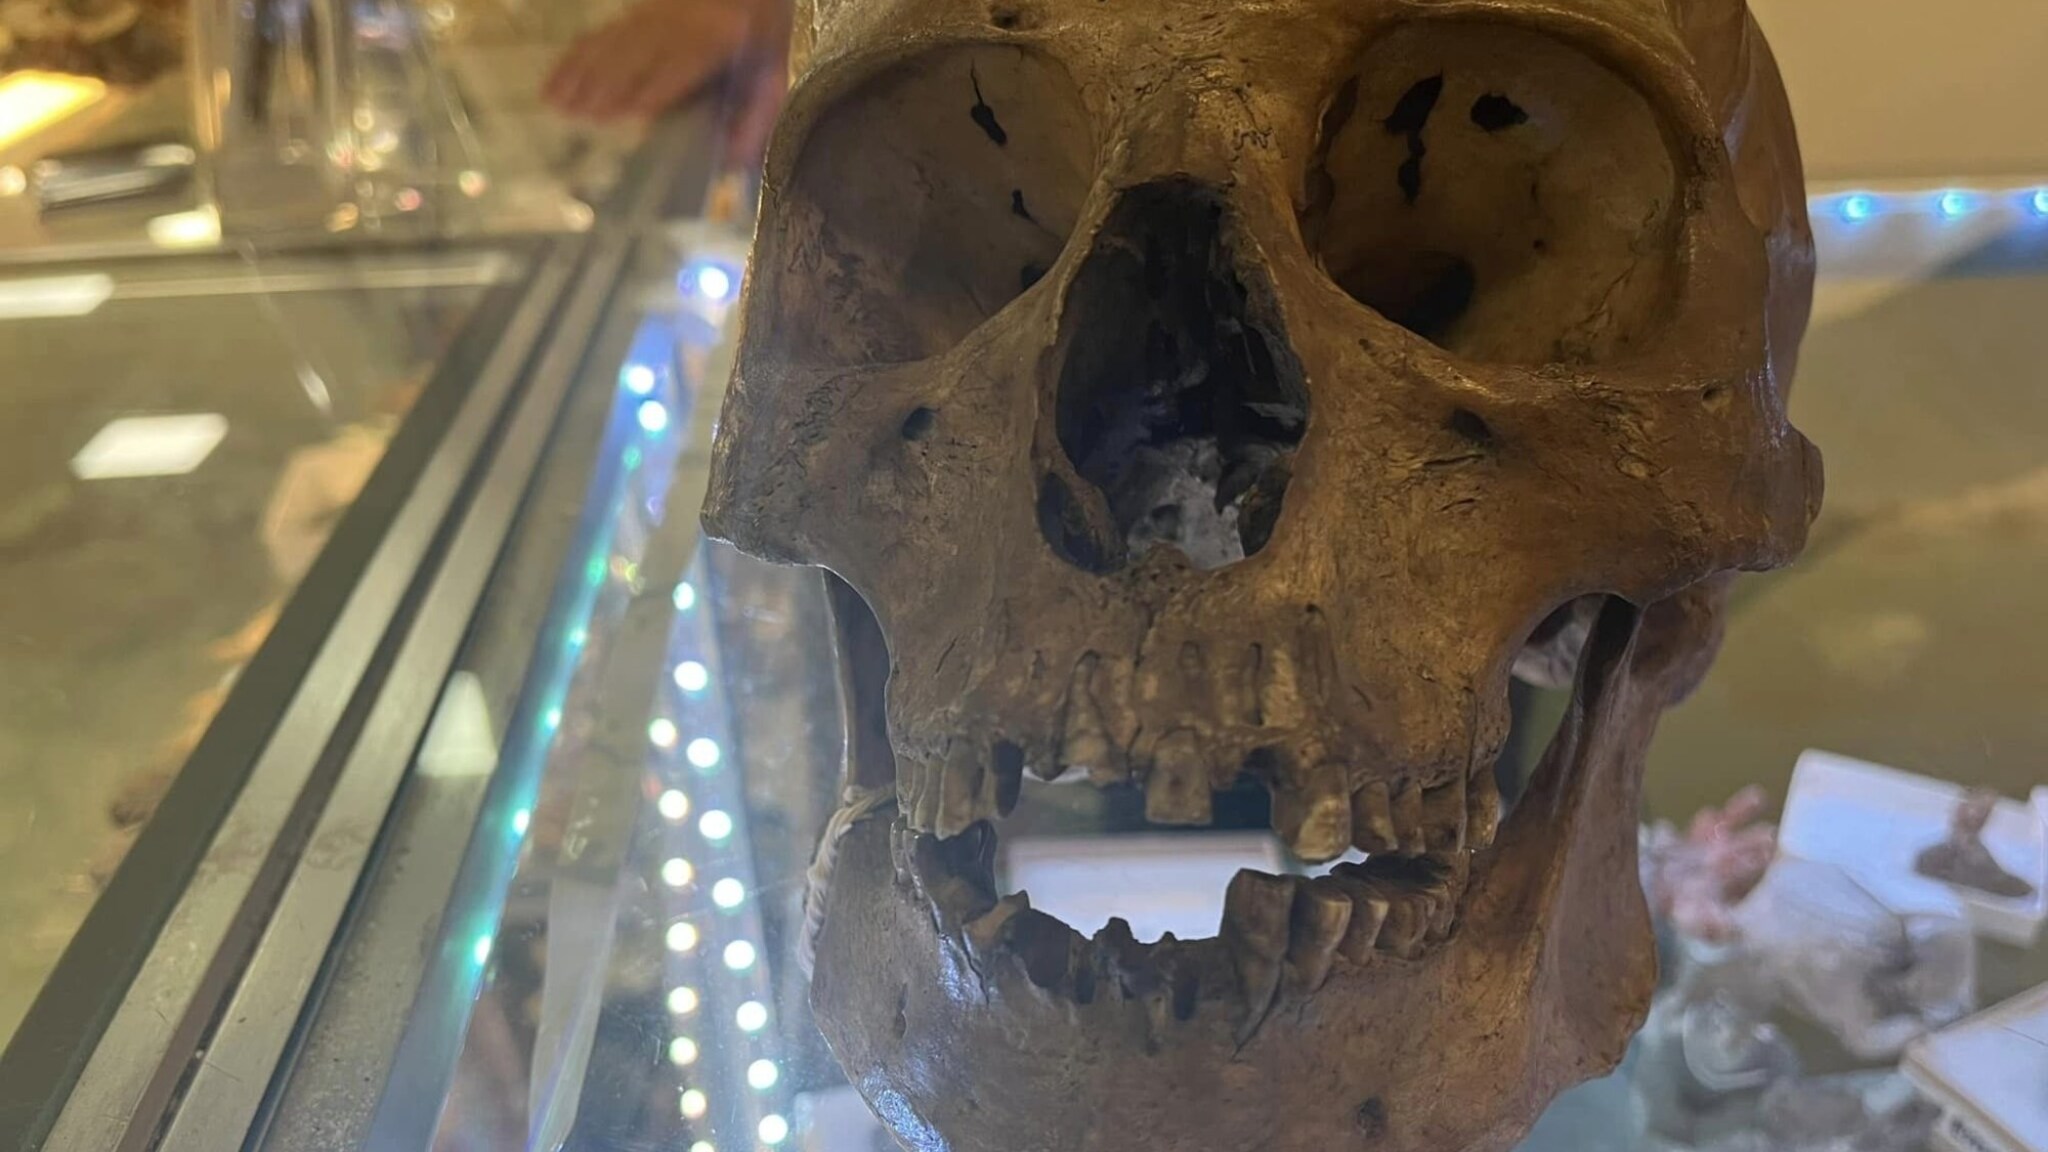 An observant anthropologist sees a real skull for sale in an American thrift store